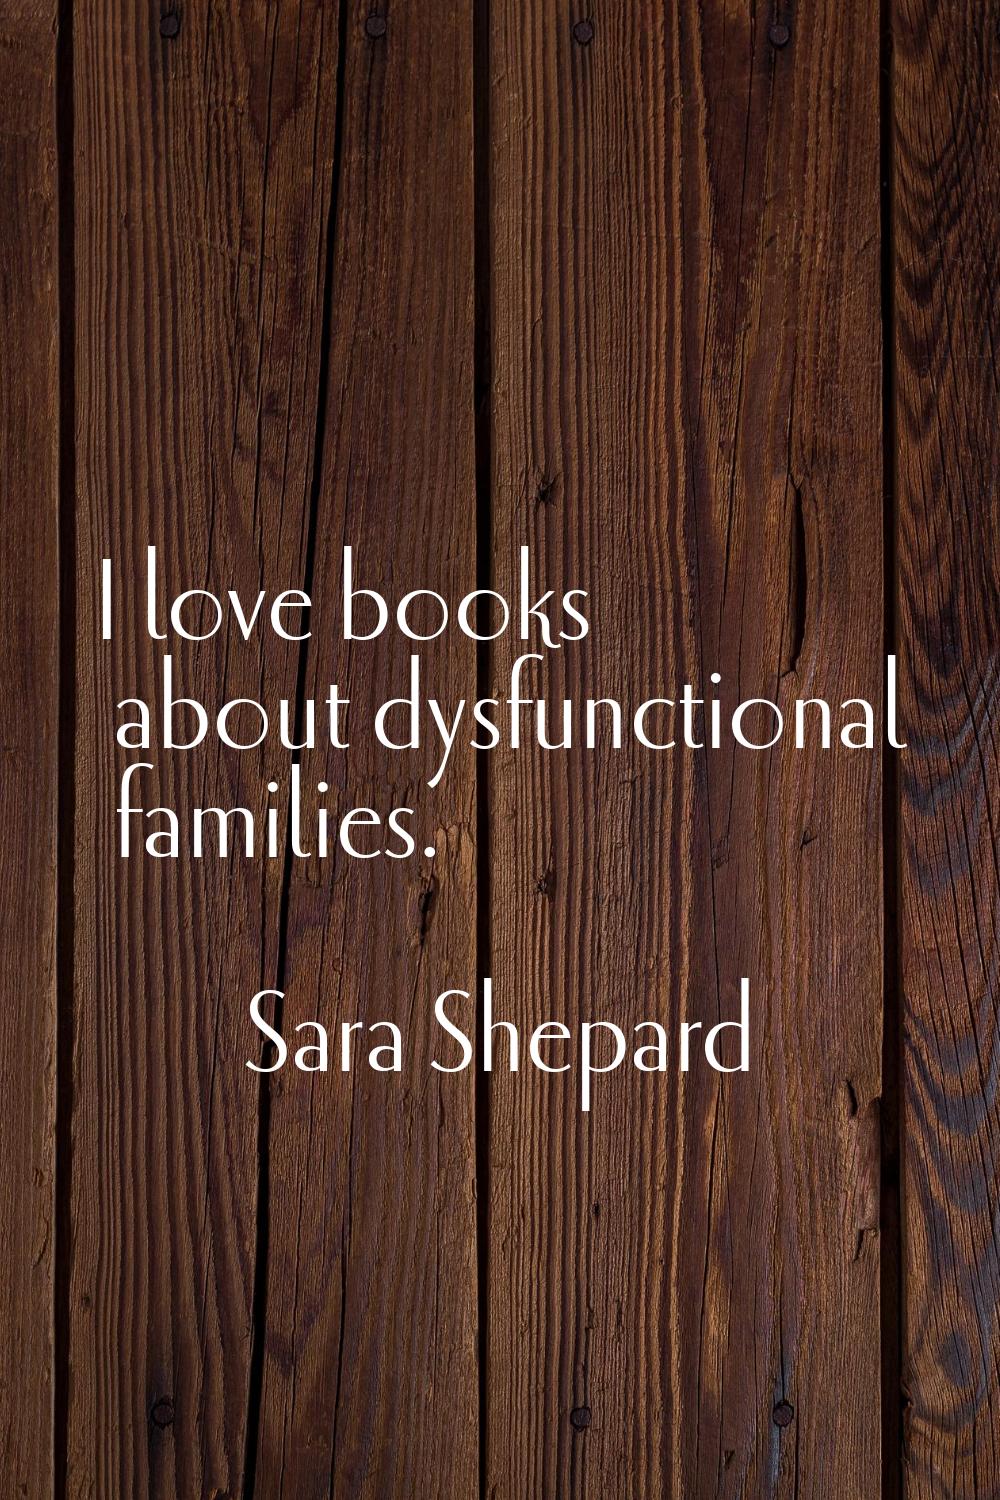 I love books about dysfunctional families.